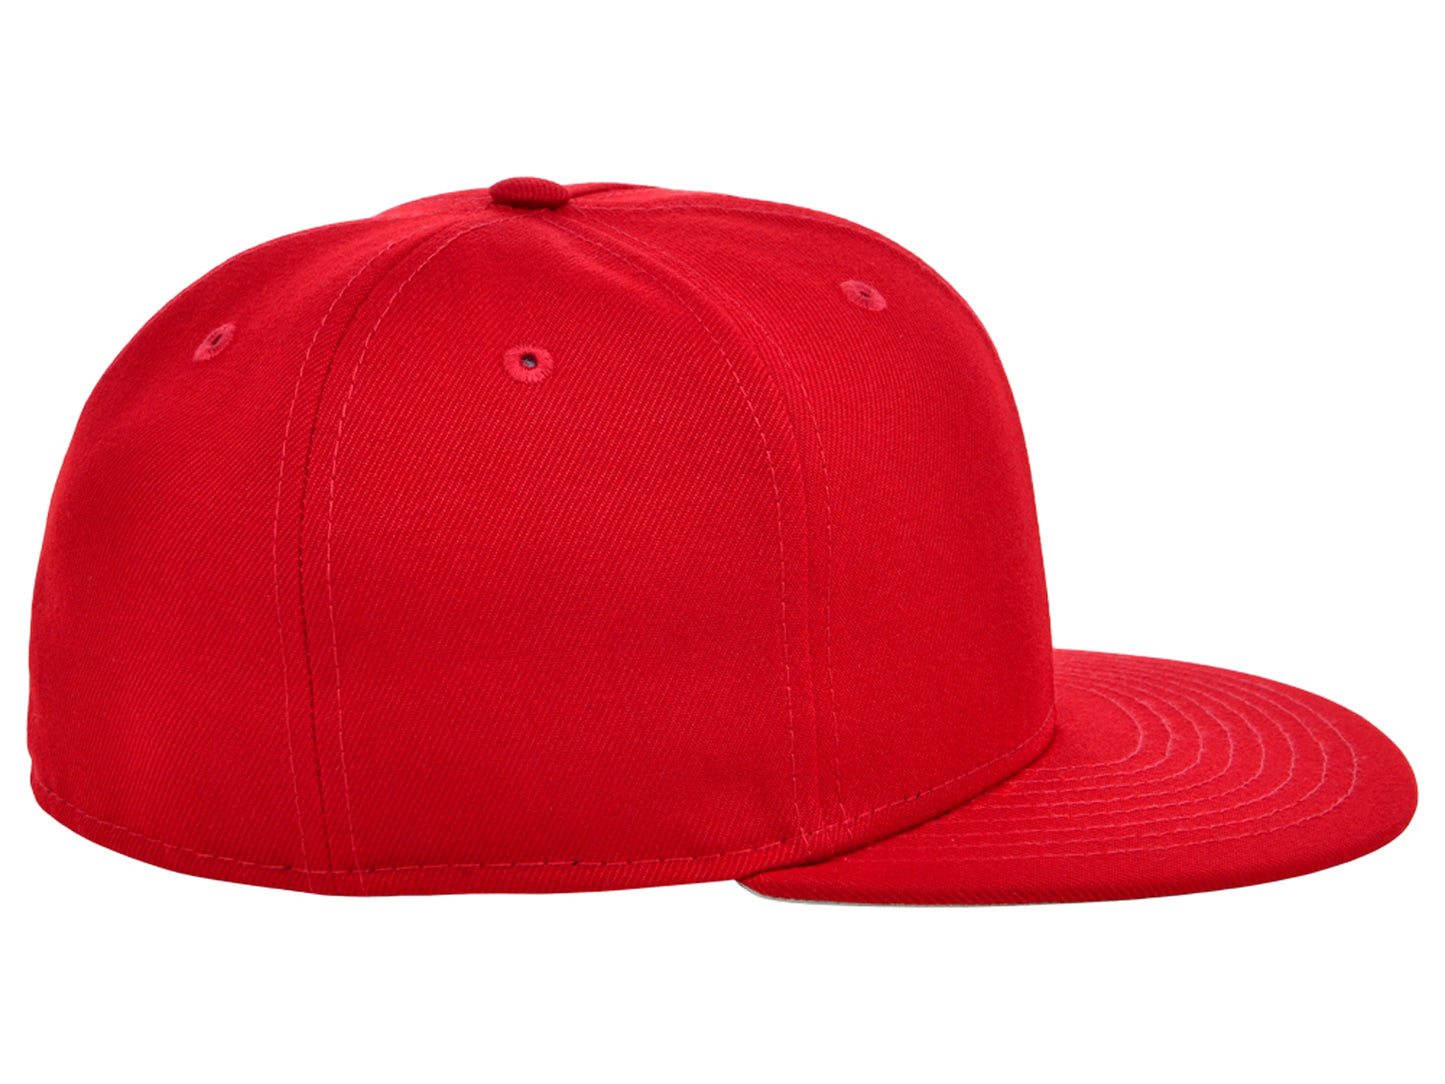 Crowns By Lids Full Court Fitted Cap - Red